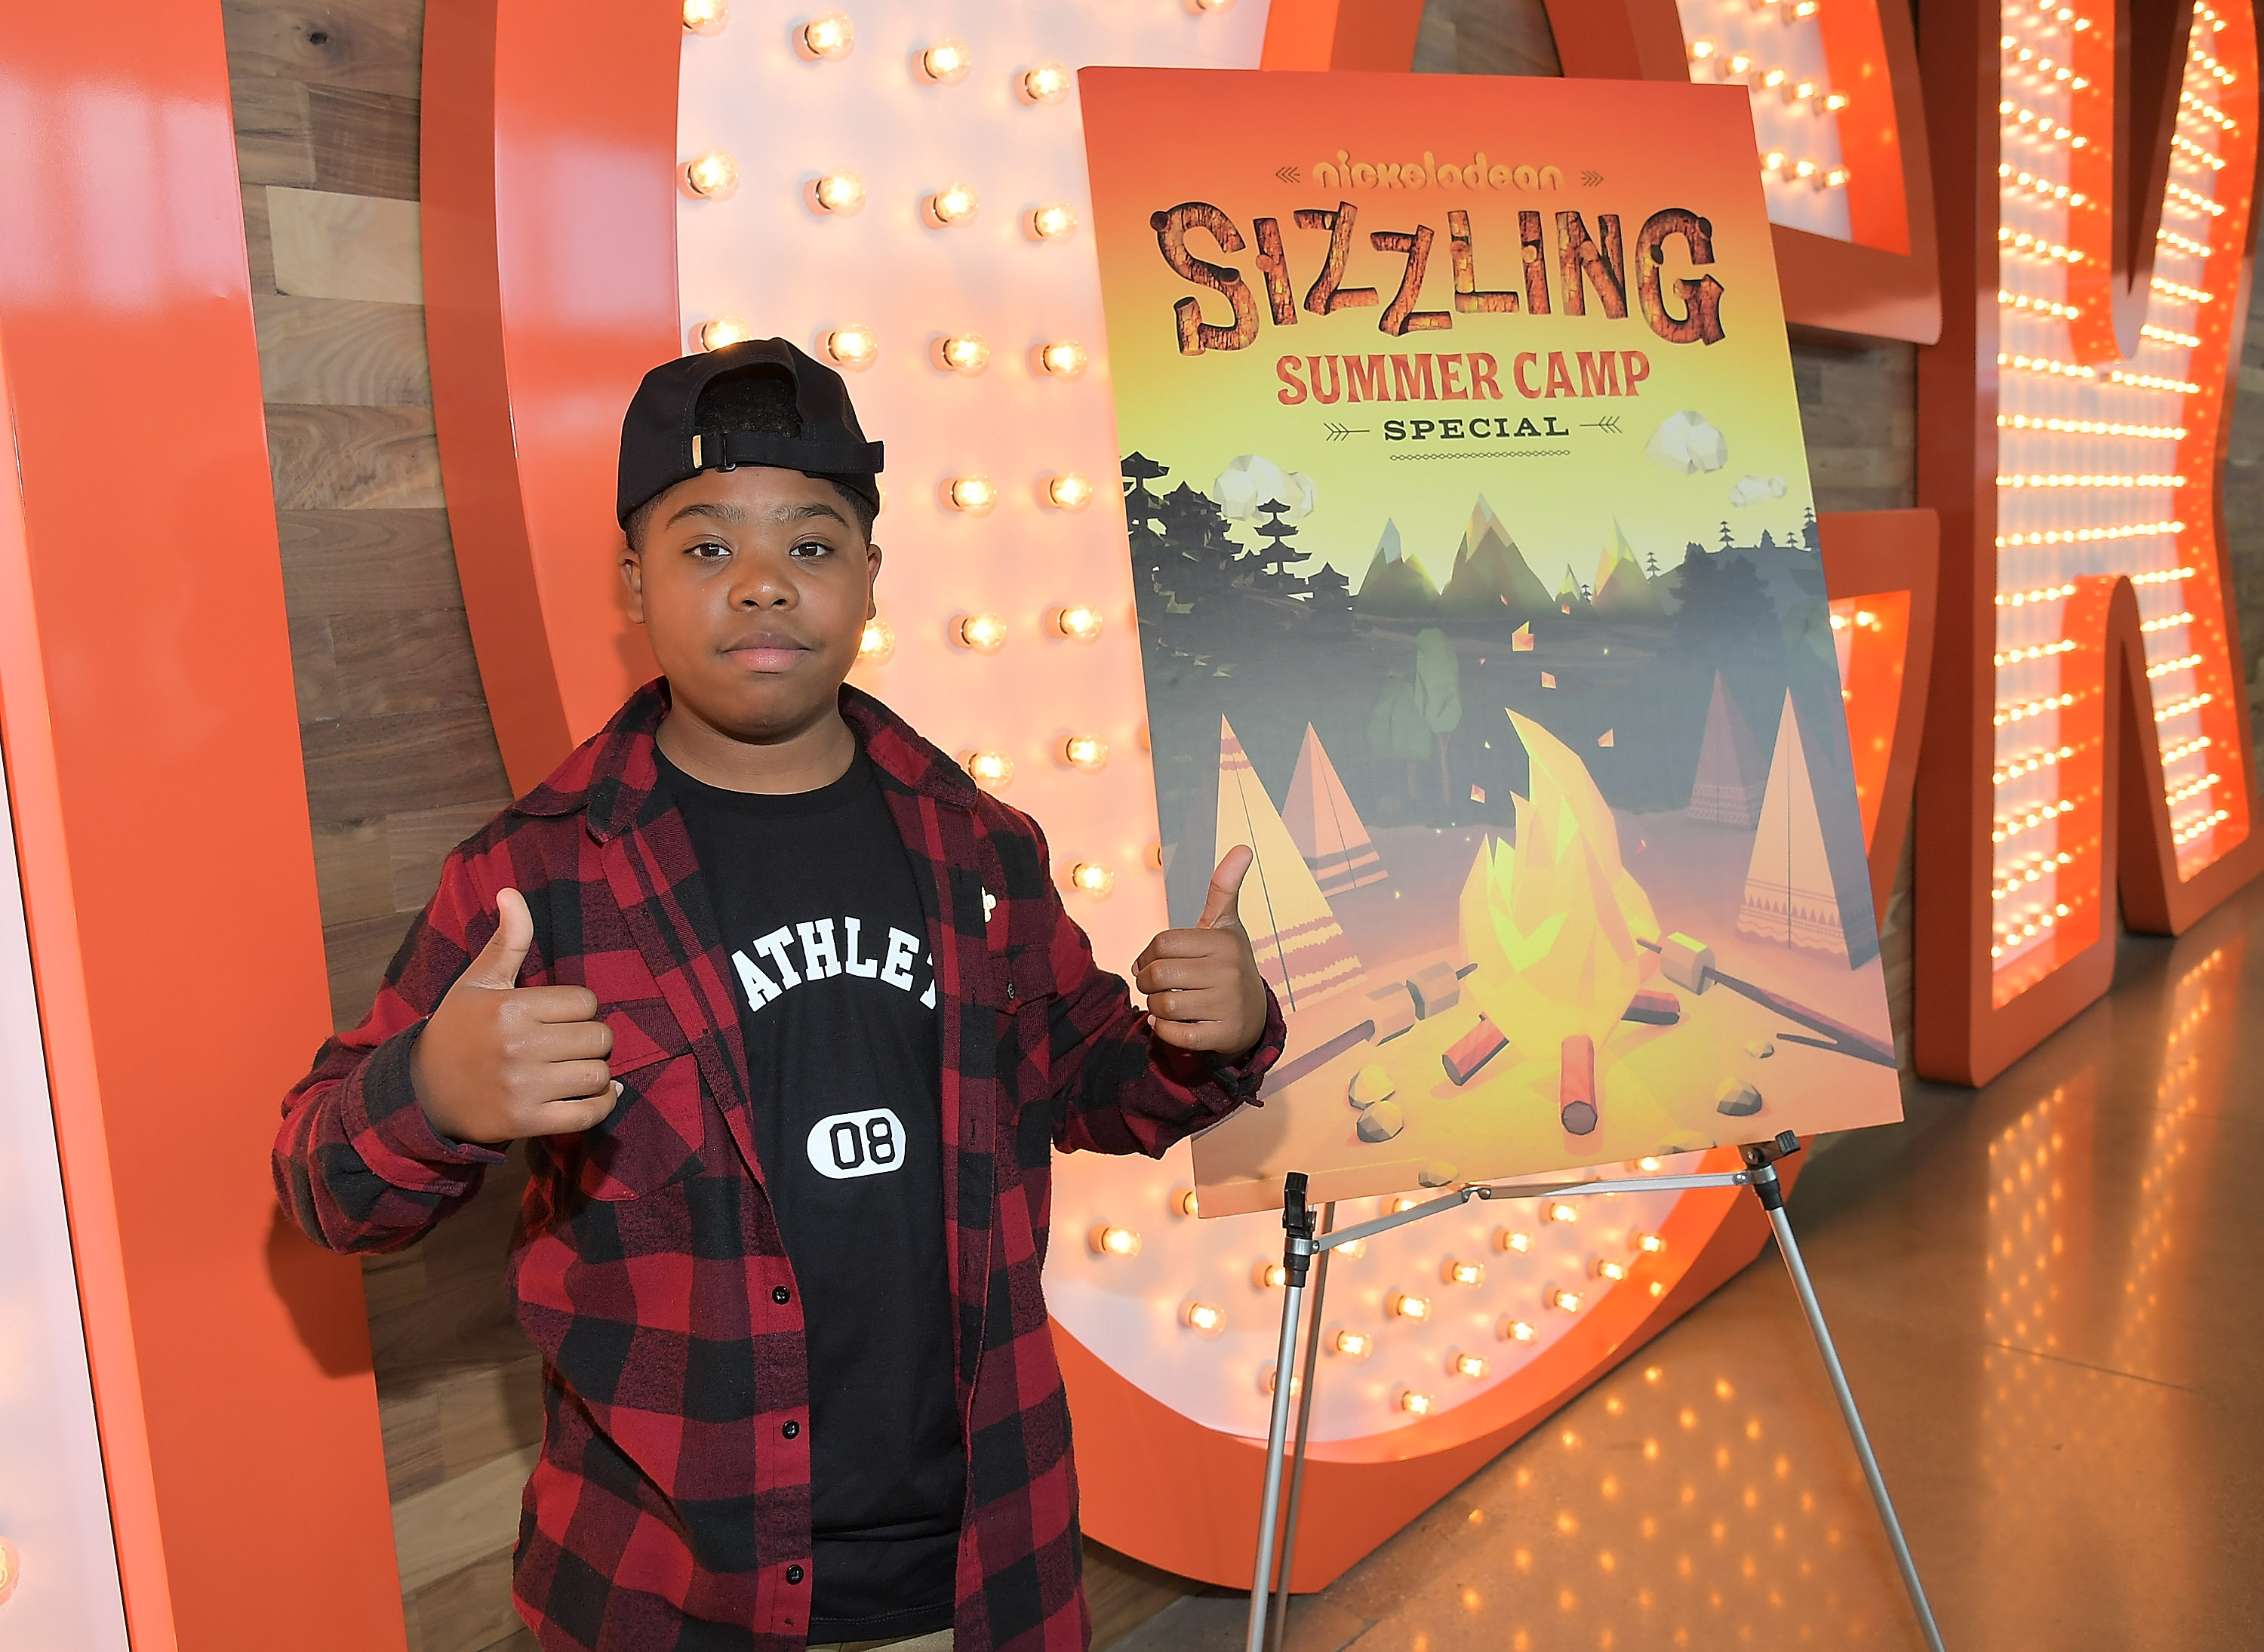 Nickelodeon's Sizzling Summer Camp Special Event